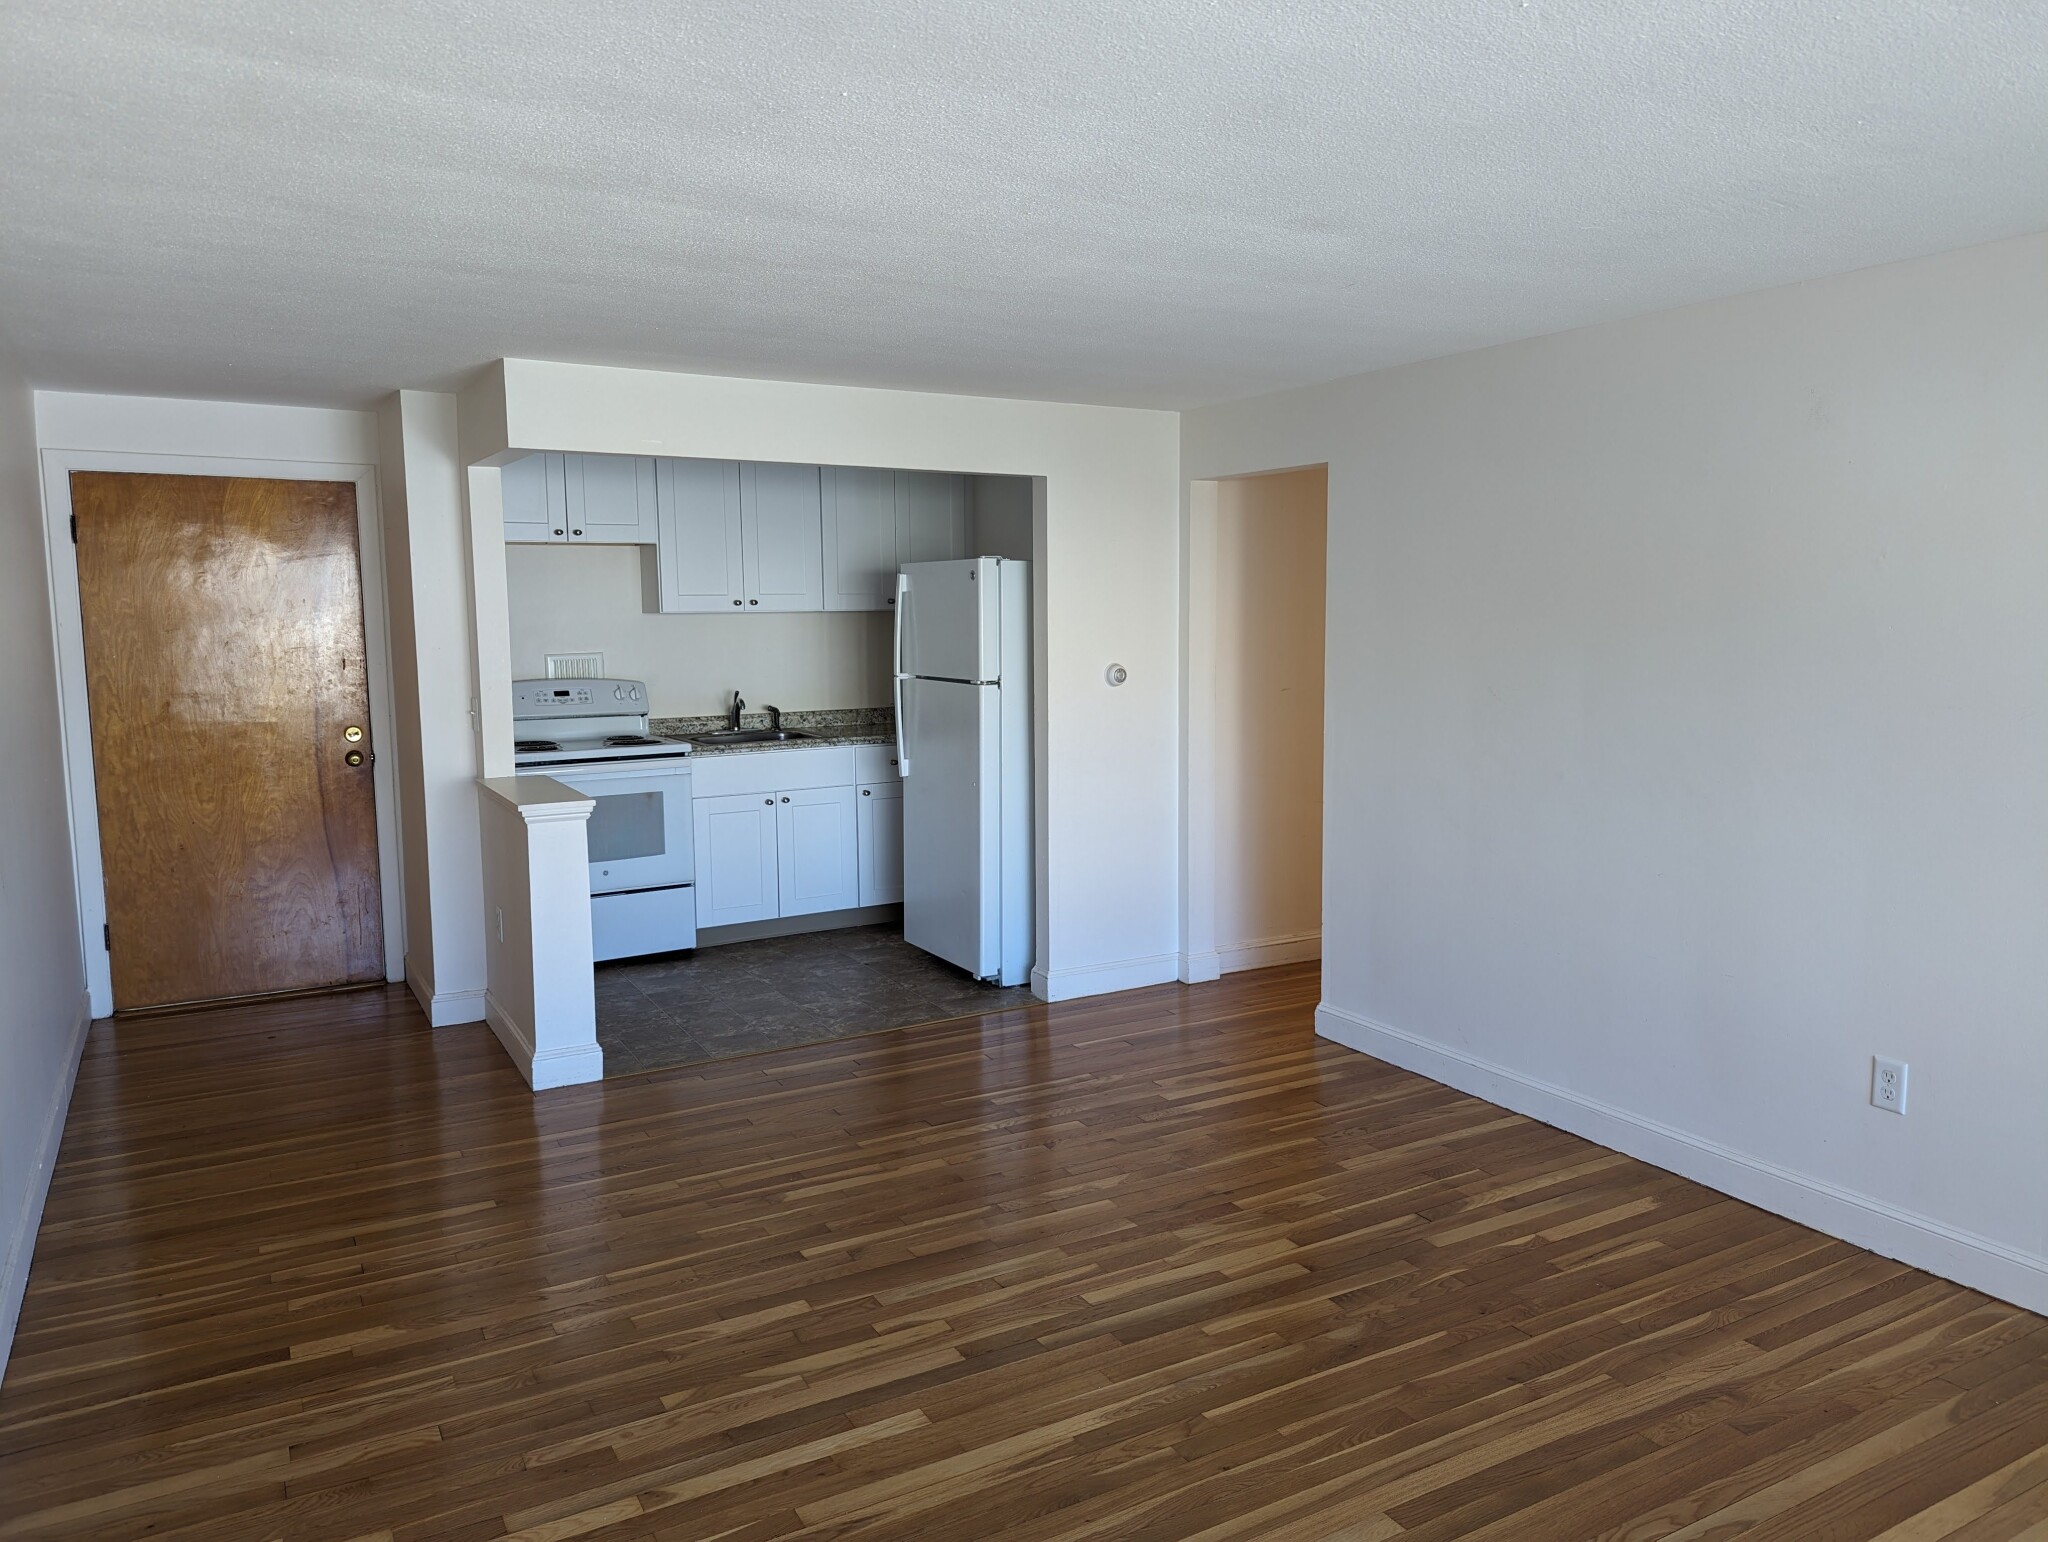 Photos of apartment on Tremont St.,Melrose MA 02176